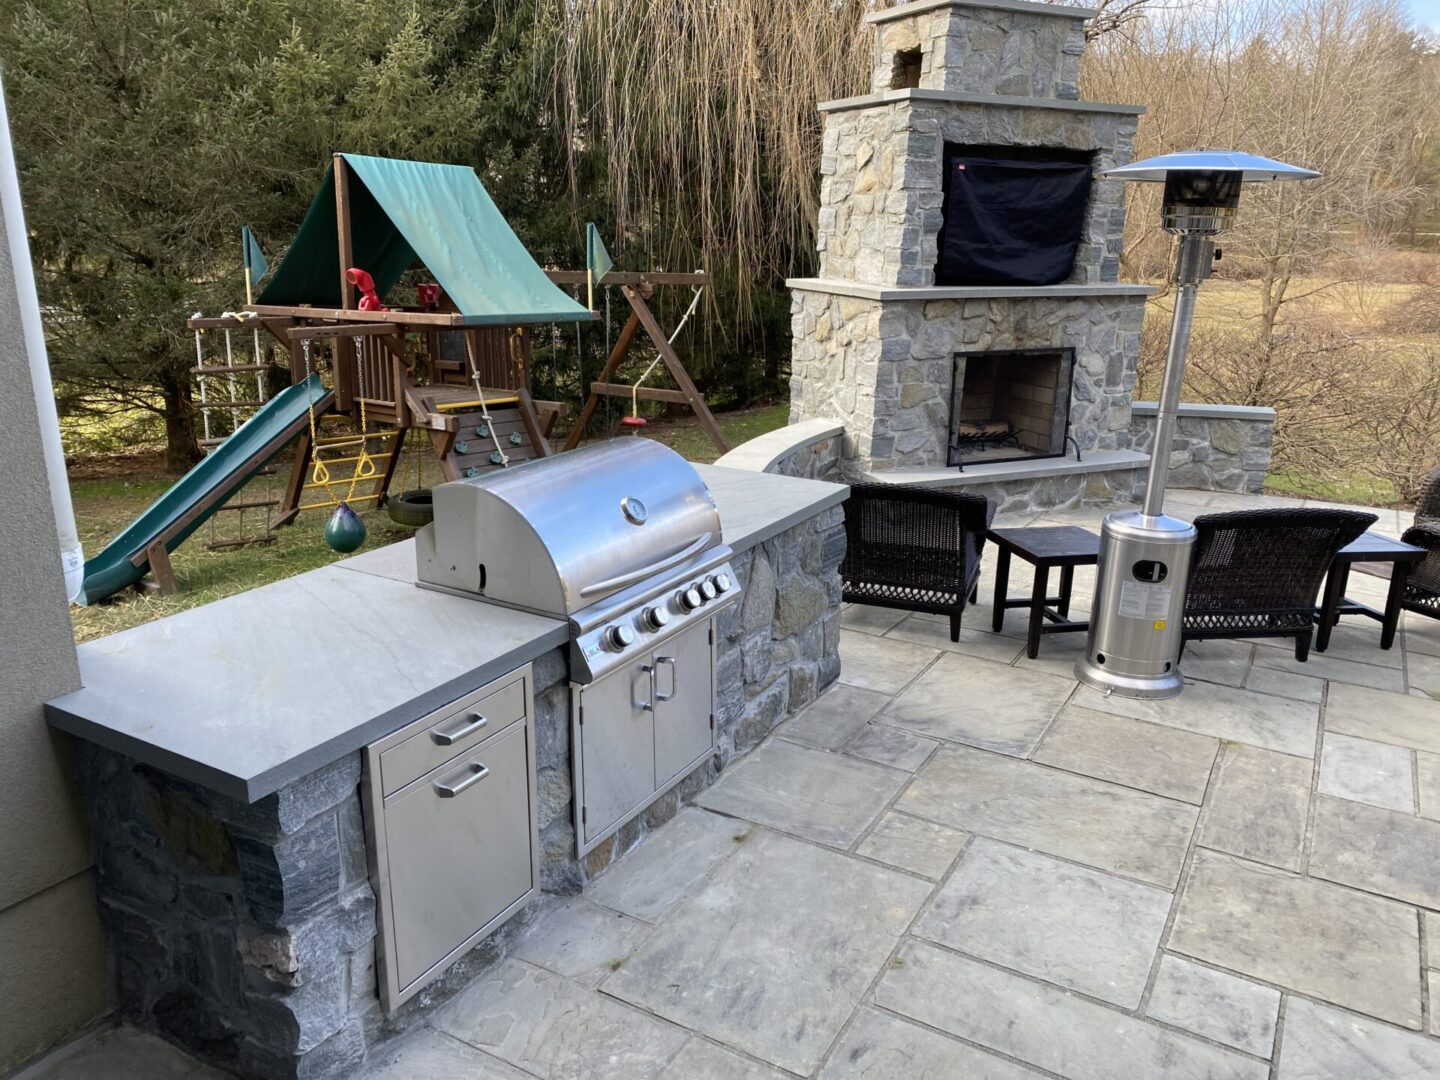 Grill station installed outside a house